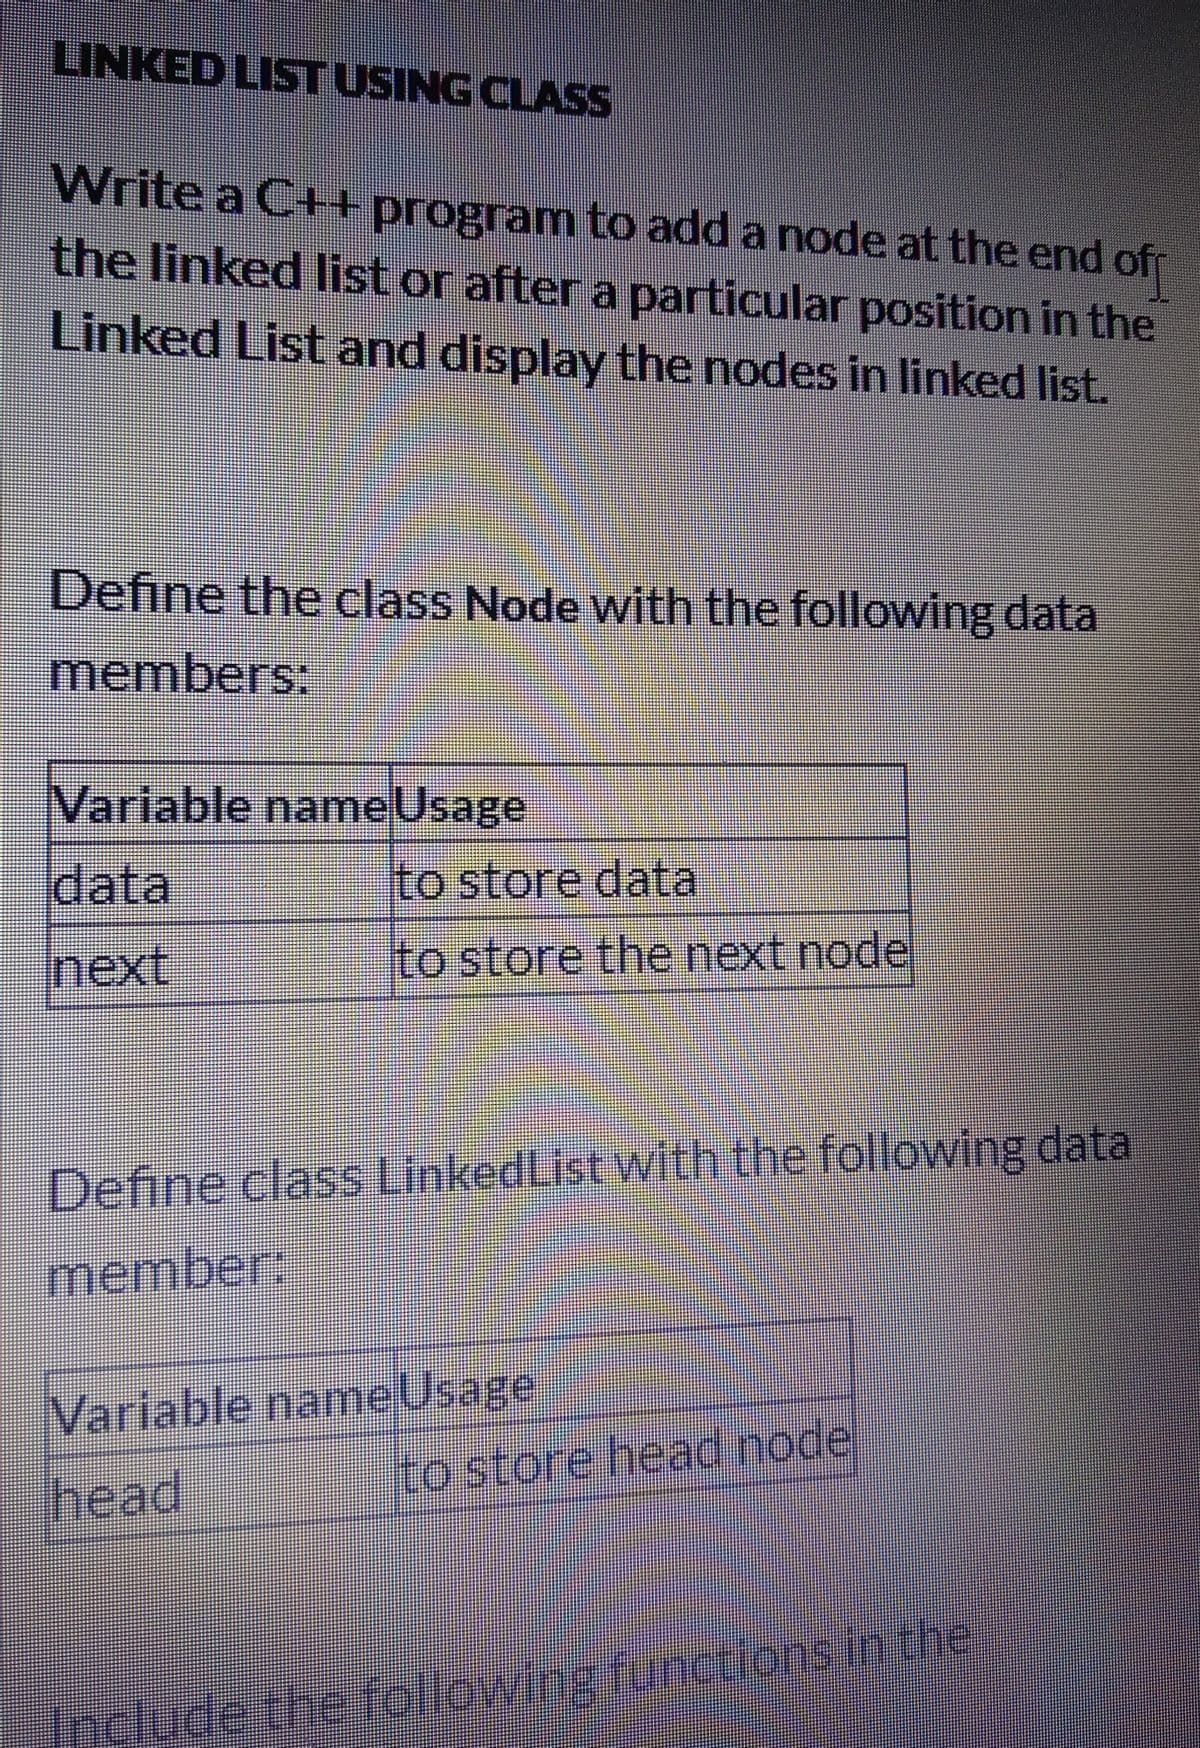 LINKED LISTUSING CLASS
Write a C+program to add a node at the end of
the linked list or after a particular position in the
Linked List and display the nodes in linked list.
Define the class Node with the following data
members;:
Variable nameUsage
data
Ito store data
next
to store the next node
Define class LinkedList with the following data
member:
Variable name Usage
to store head node
head
focludethe followingfunctions.in the
